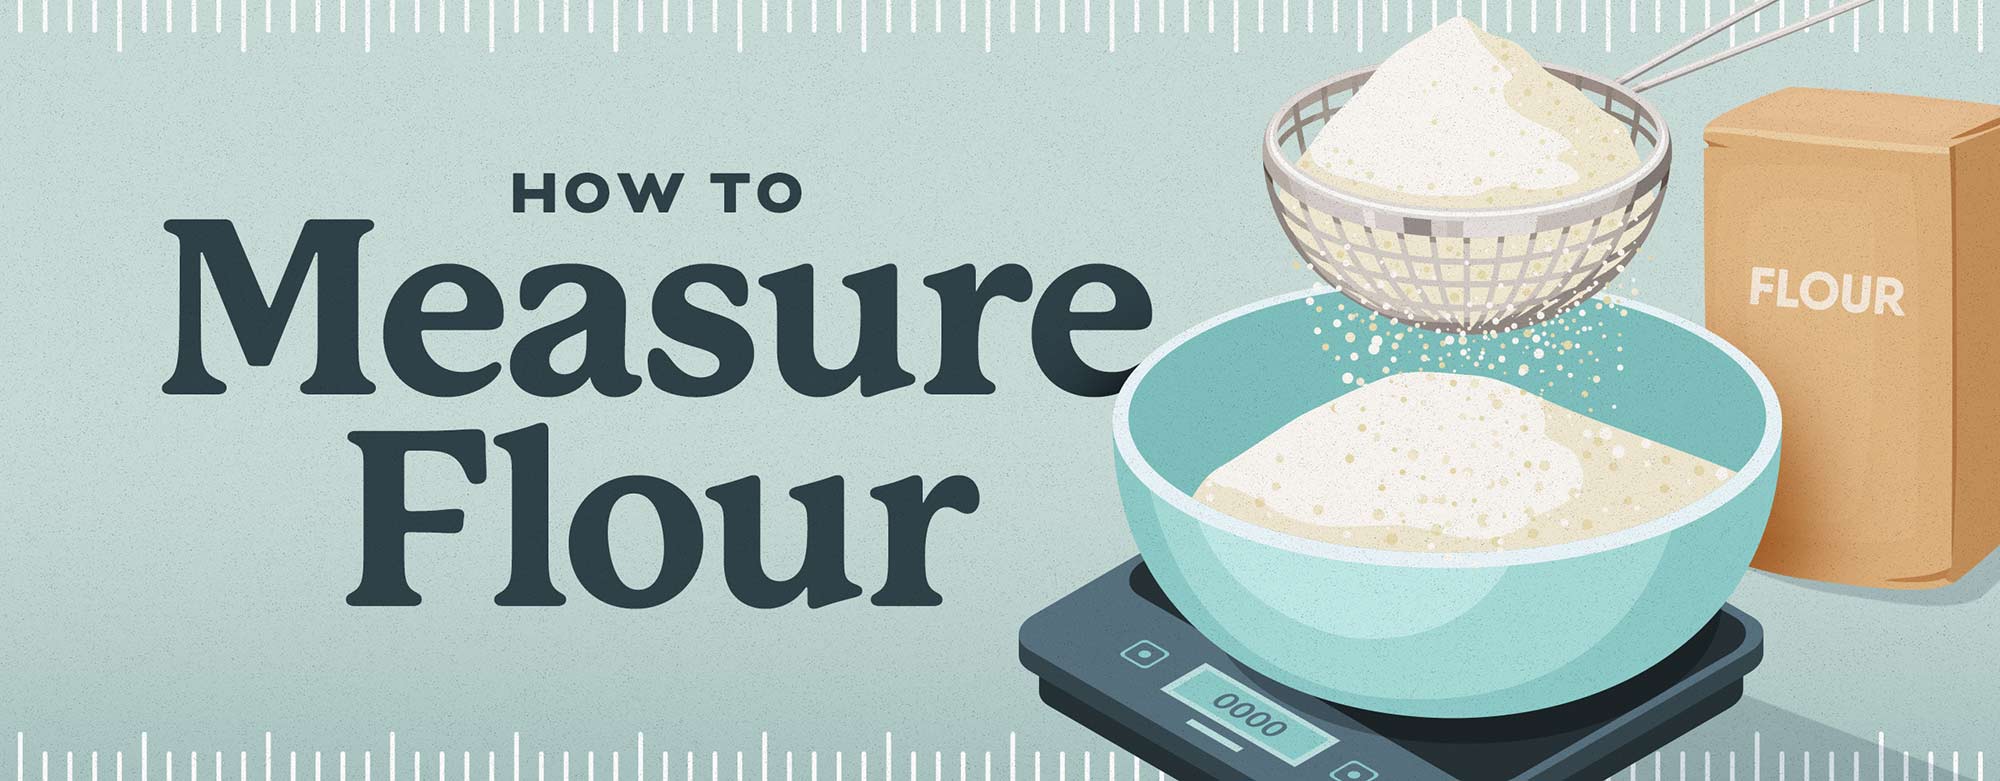 How to Measure Flour - with and without a Kitchen Scale - Just so Tasty